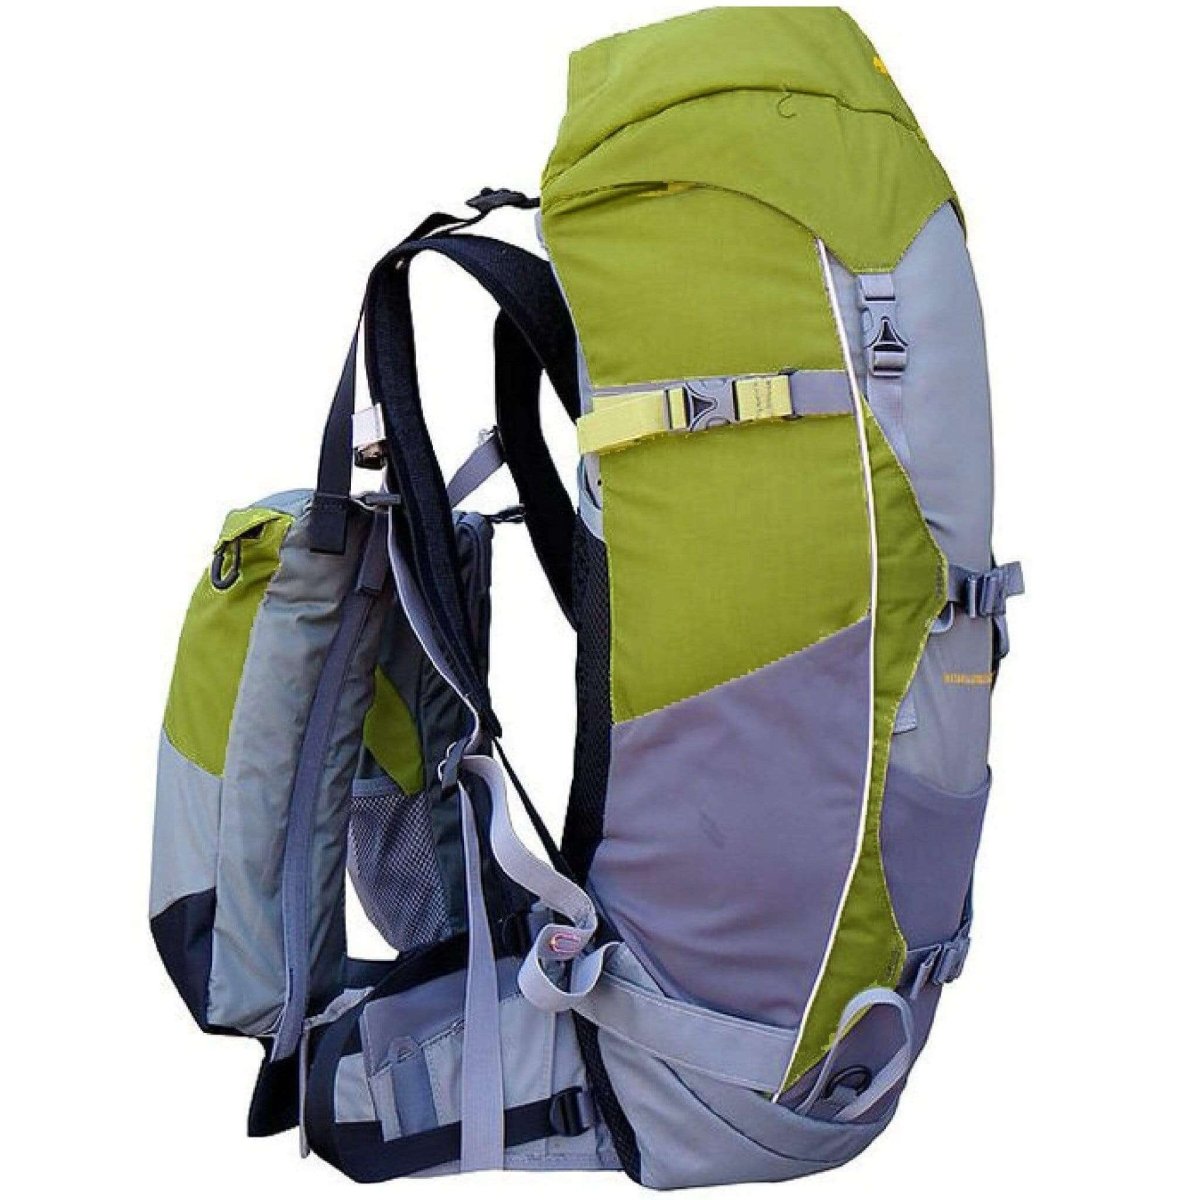 Reasons to Invest in a Quality Hiking Backpack - Light Hiking Gear